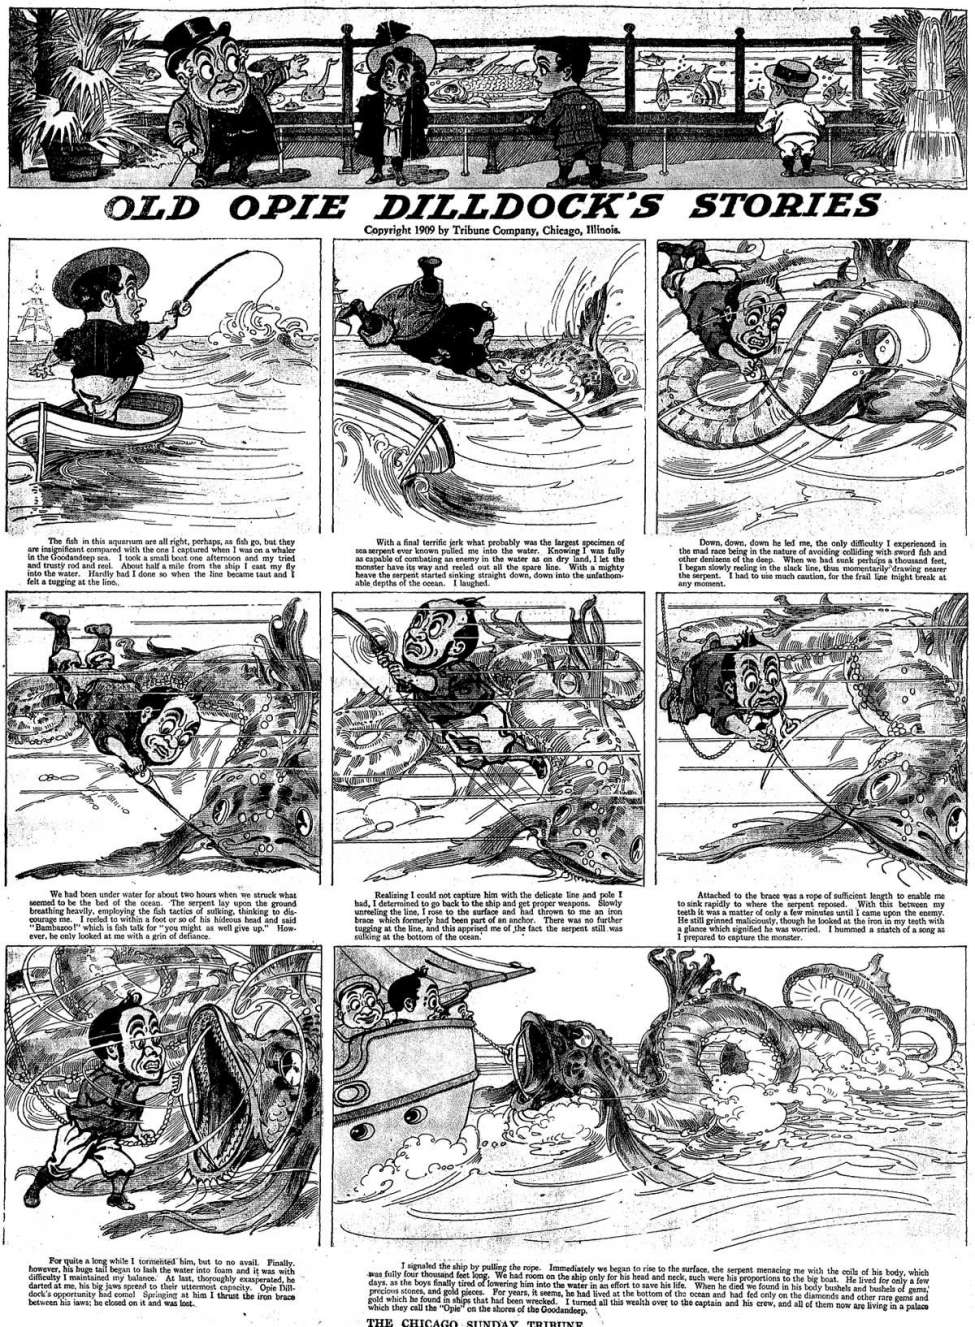 Book Cover For Old Opie Dilldock - Chicago Tribune (1909)